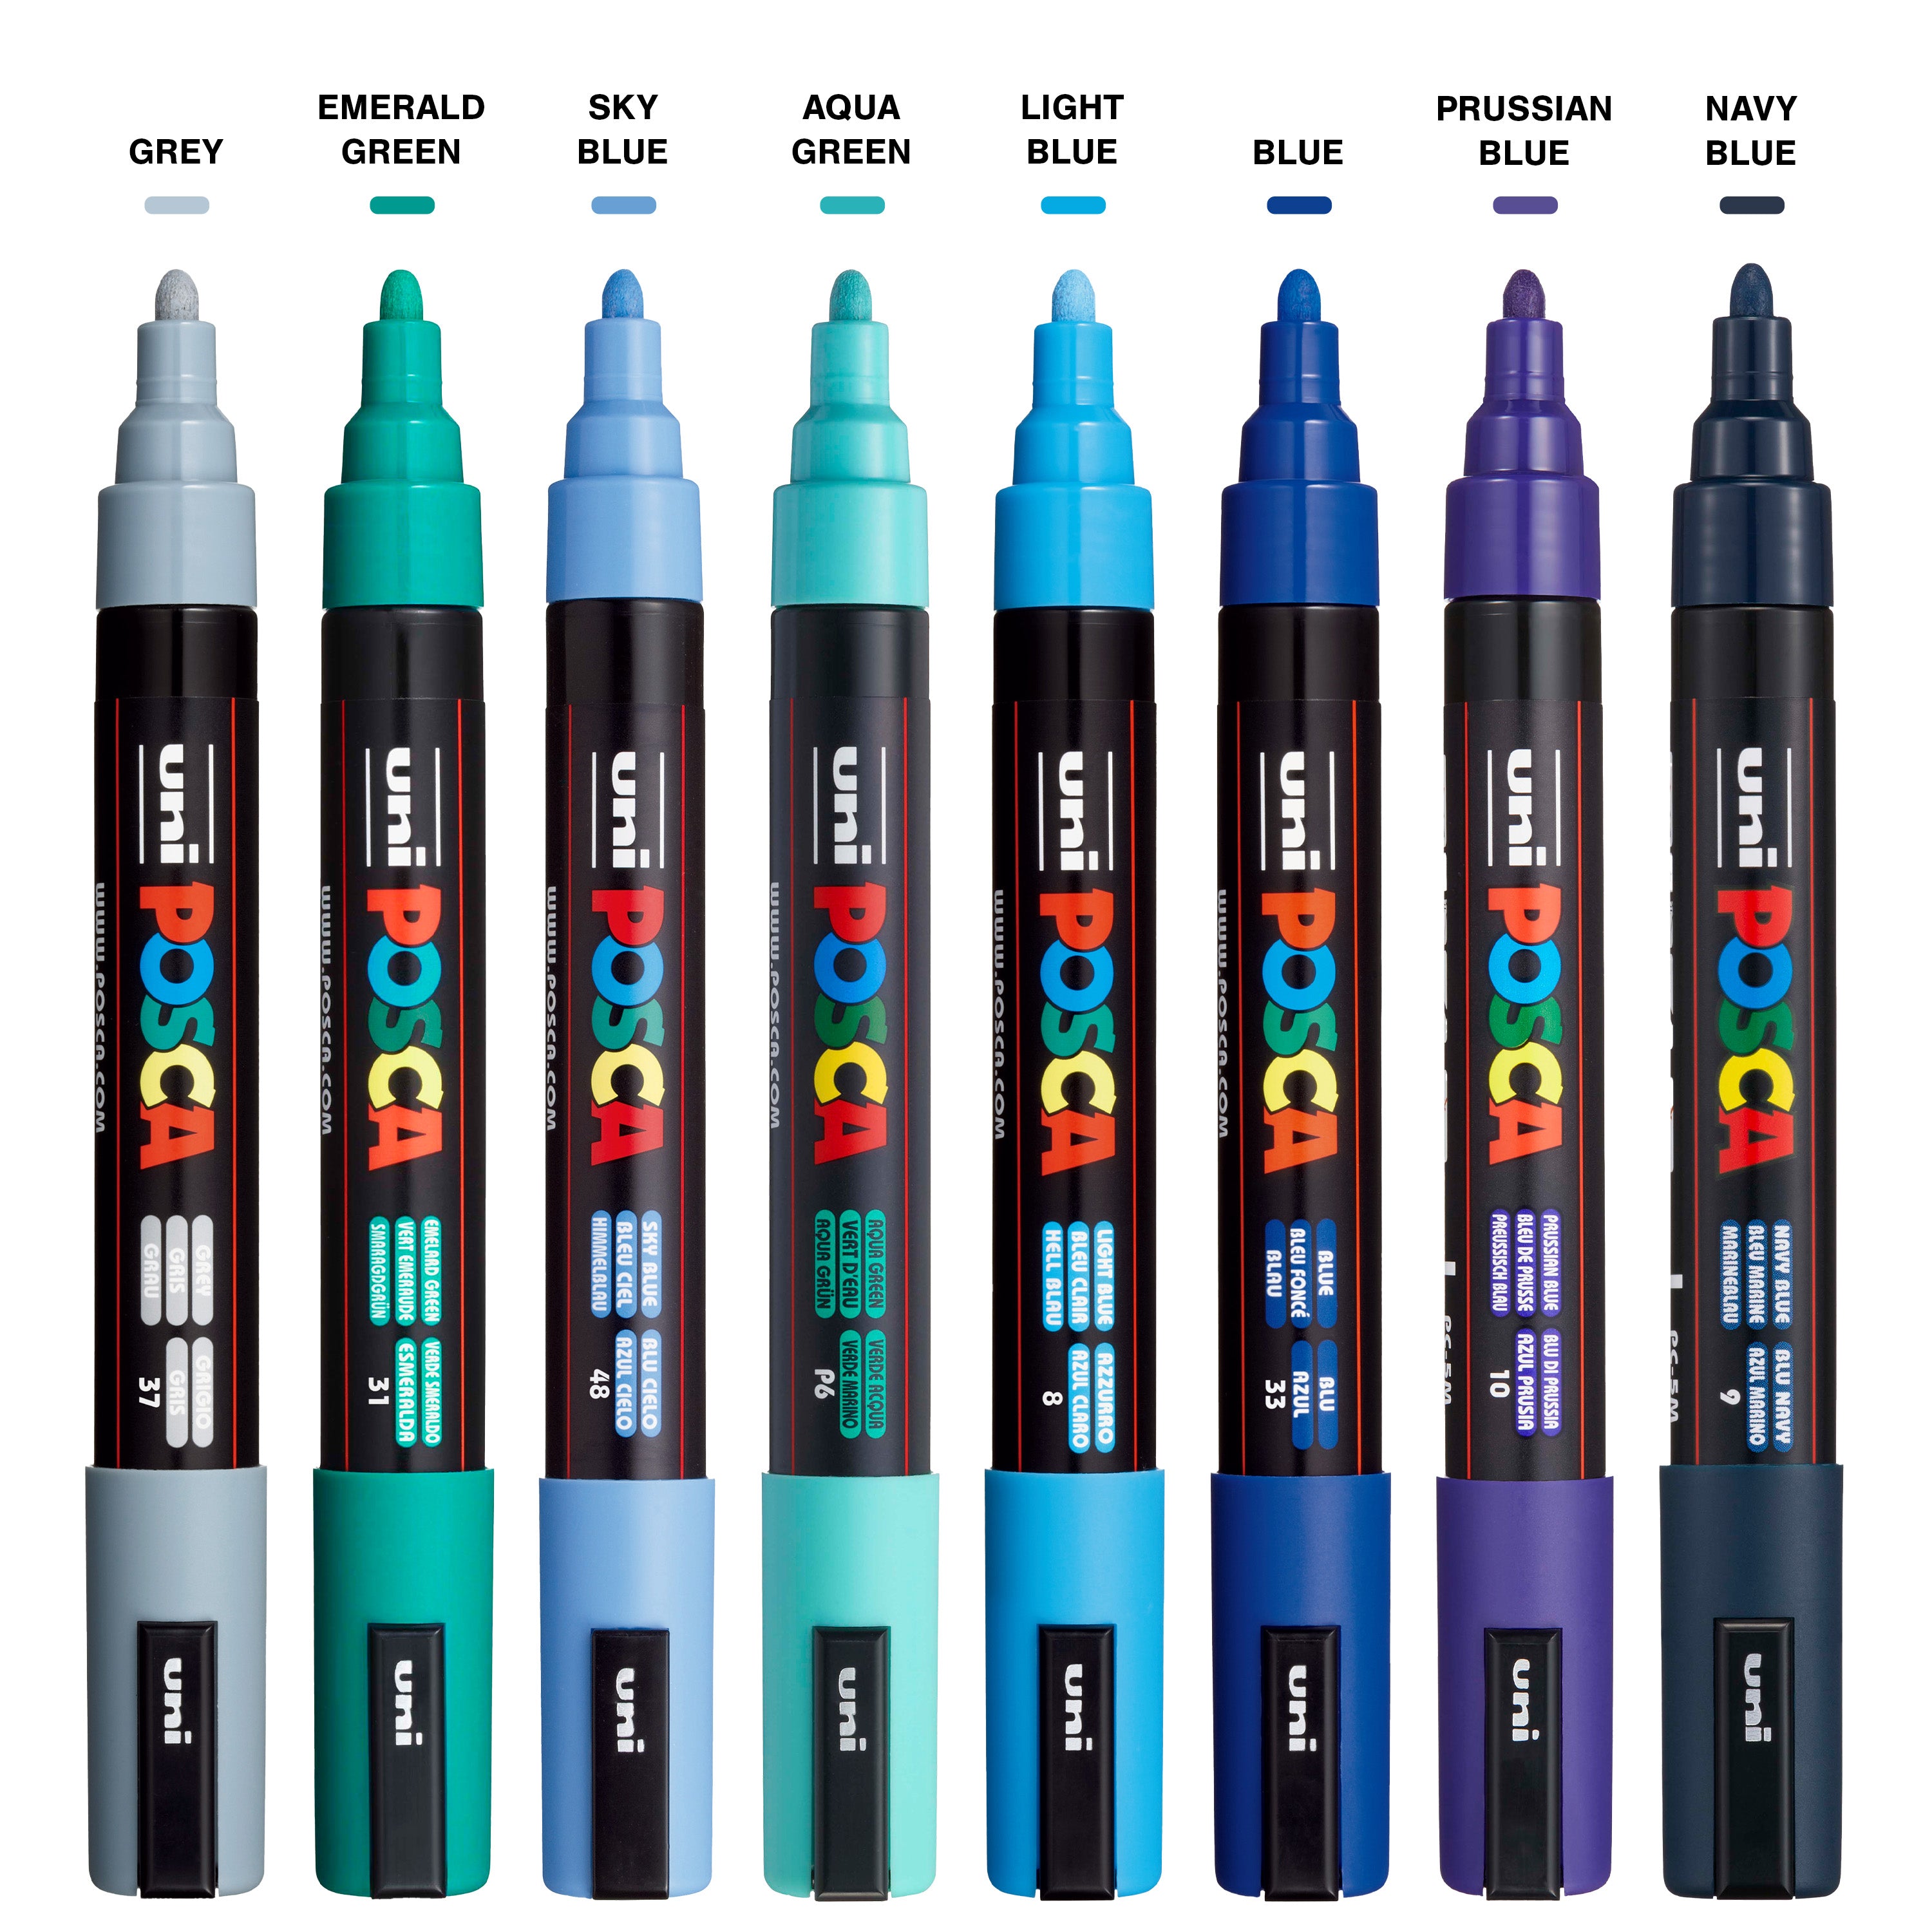 uni® POSCA® PC-5M, Cooltone Water-Based Paint Markers (8 Pack)